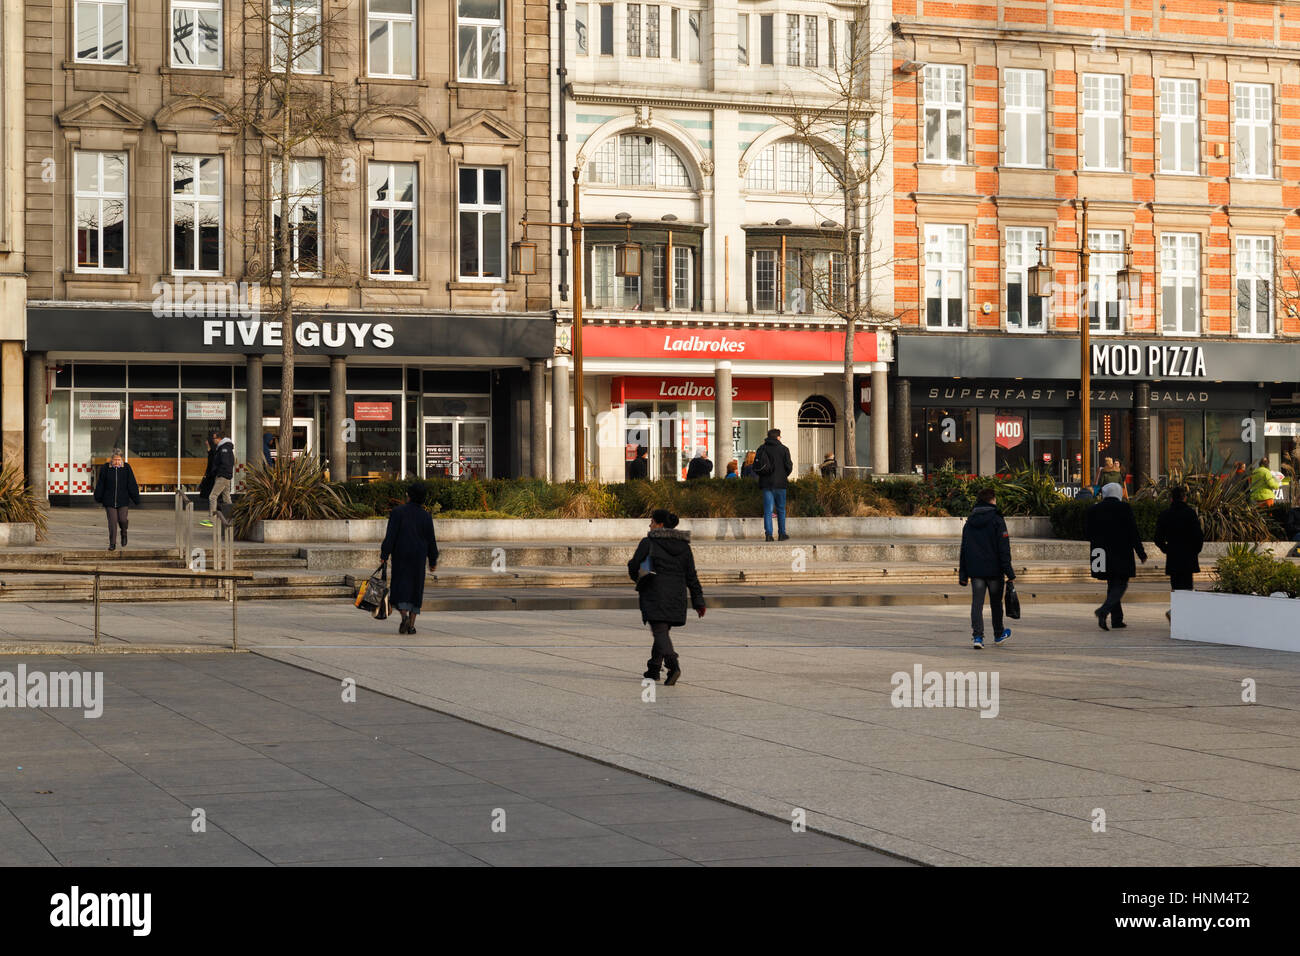 NOTTINGHAM, ENGLAND - FEBRUARY 13: Five Guys burger, and MOD pizza restaurant in close proximity, Nottingham. In Nottingham, England. On 13th February Stock Photo